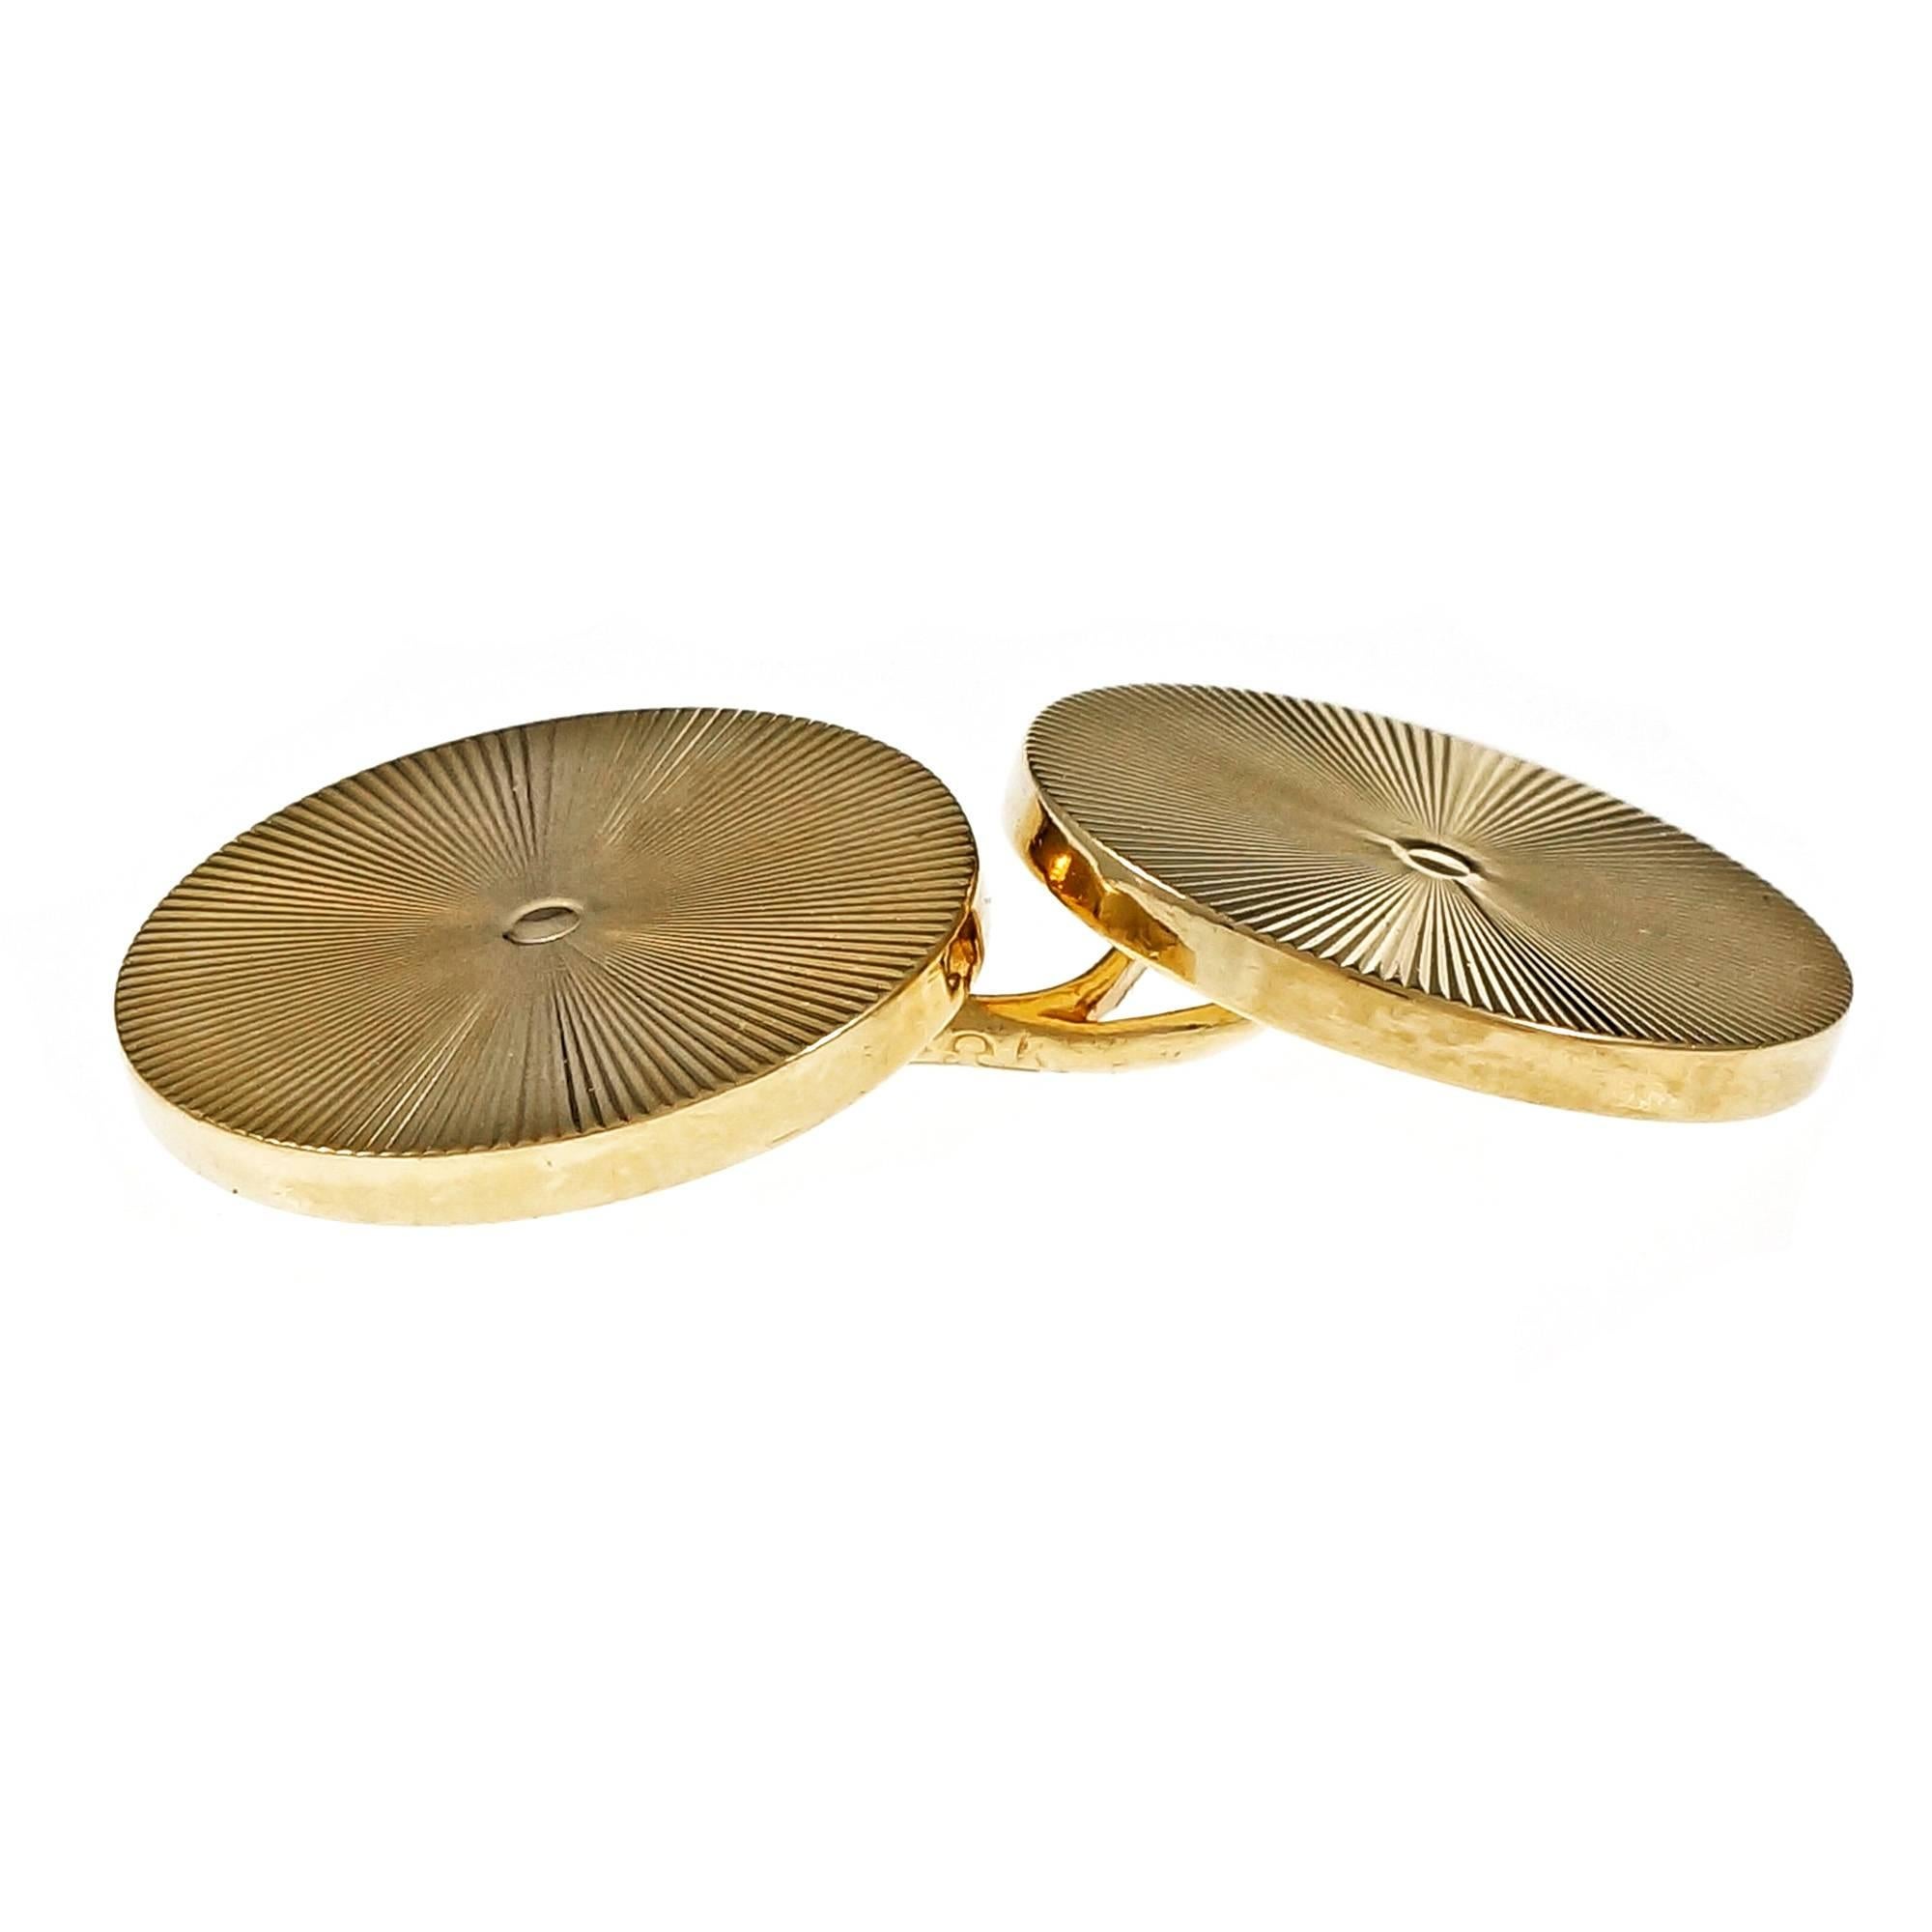 Tiffany & Co Larter & Sons 1950 -1960 heavy weight double sided textured
14k yellow gold cuff links.

14k yellow gold
Tested and stamped: 14k
Hallmark: Tiffany & Co
14.6 grams
Top to bottom: 14.73mm or .58 inch
Width: 14.73mm or .58 inch
Depth: